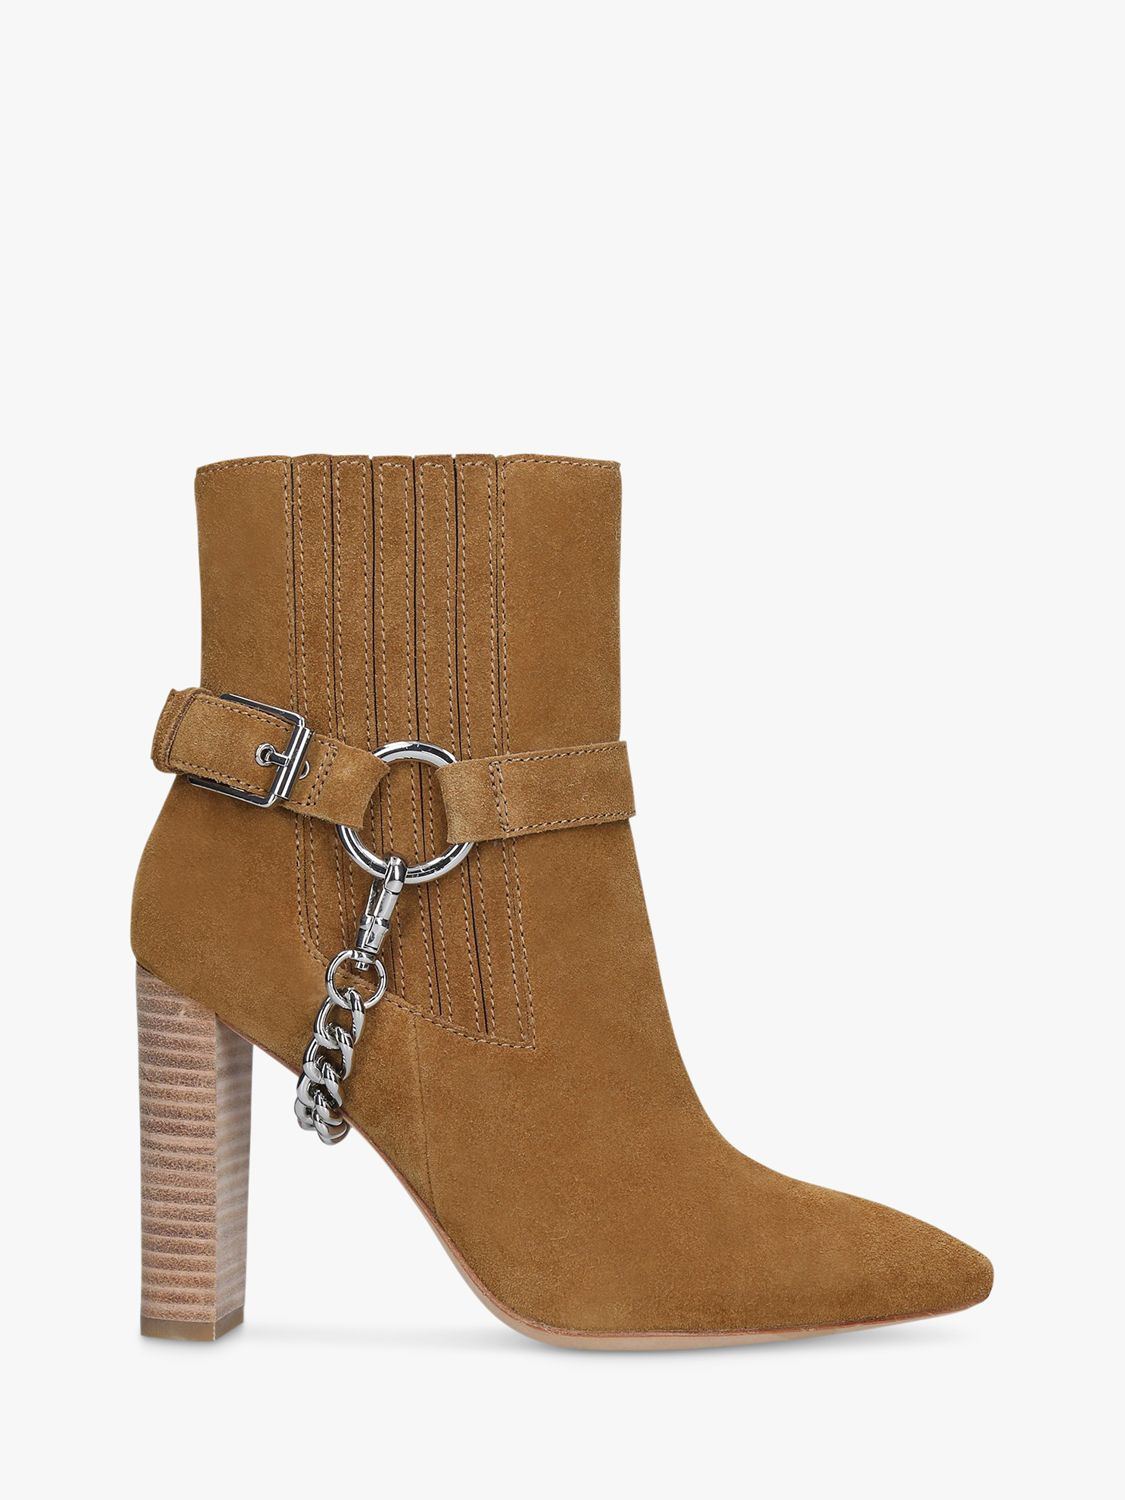 PAIGE London Suede Ankle Boots, Brown